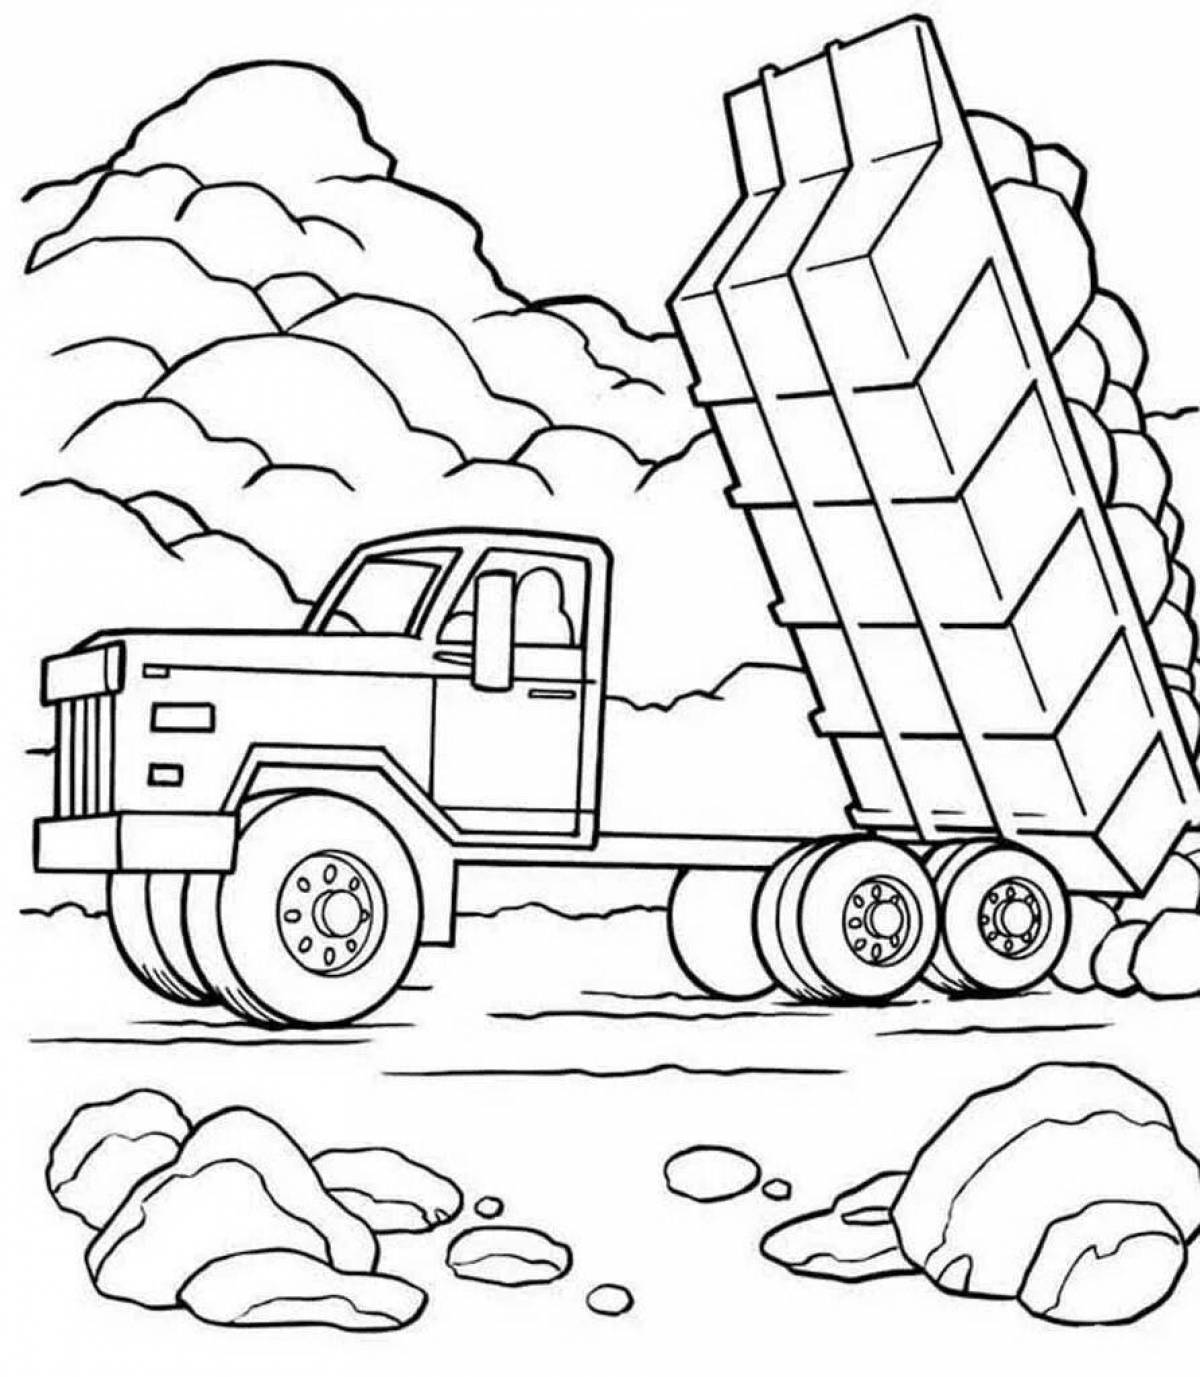 Incredible truck coloring book for teens